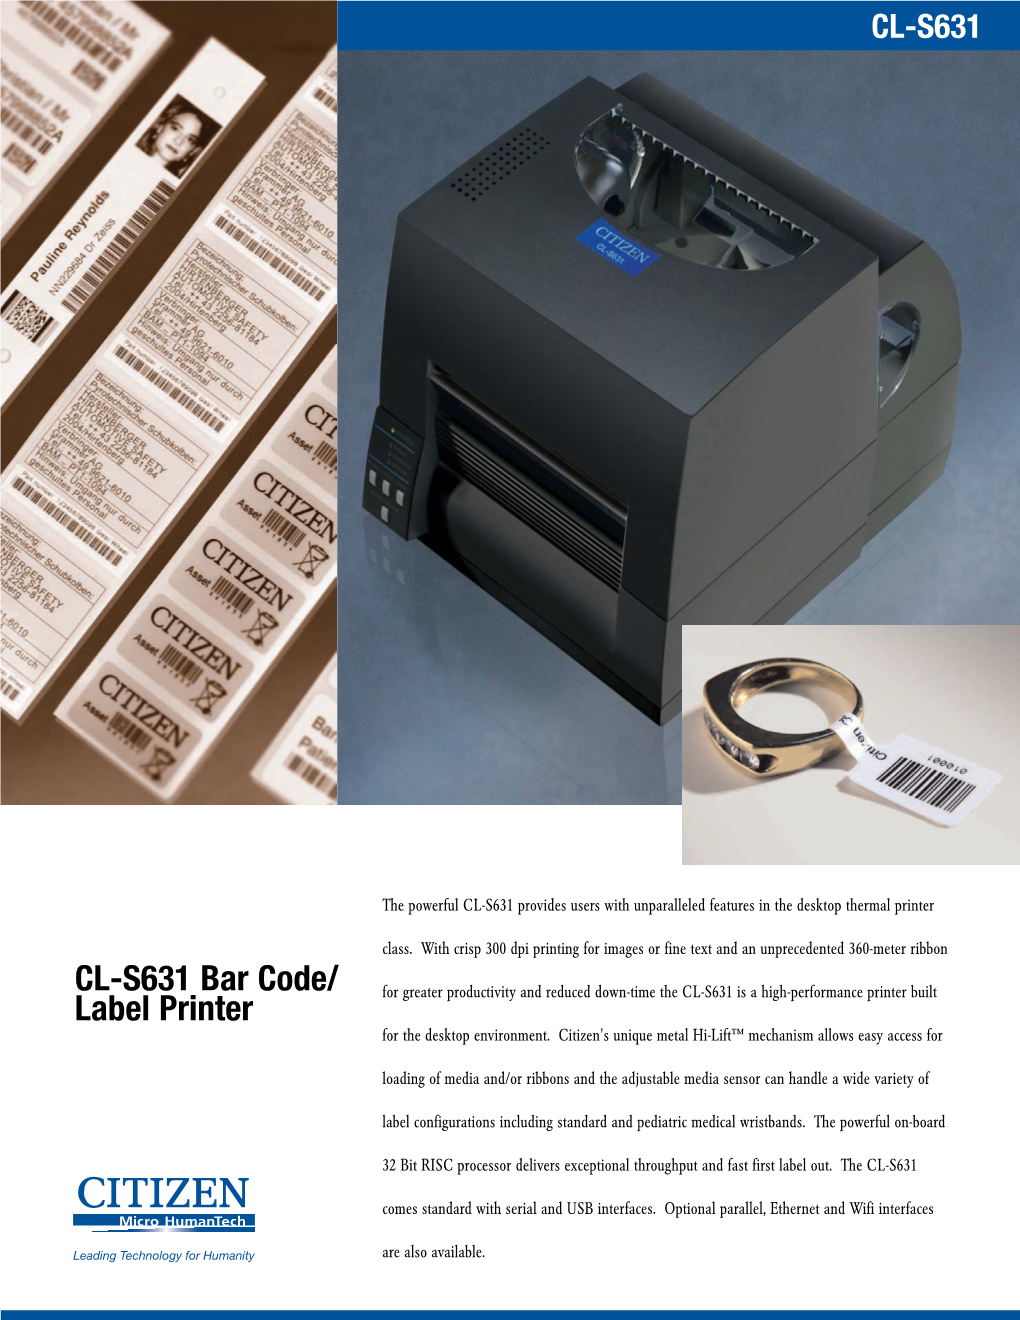 CL-S631 Bar Code/ Label Printer for Greater Productivity and Reduced Down-Time the CL-S631 Is a High-Performance Printer Built for the Desktop Environment